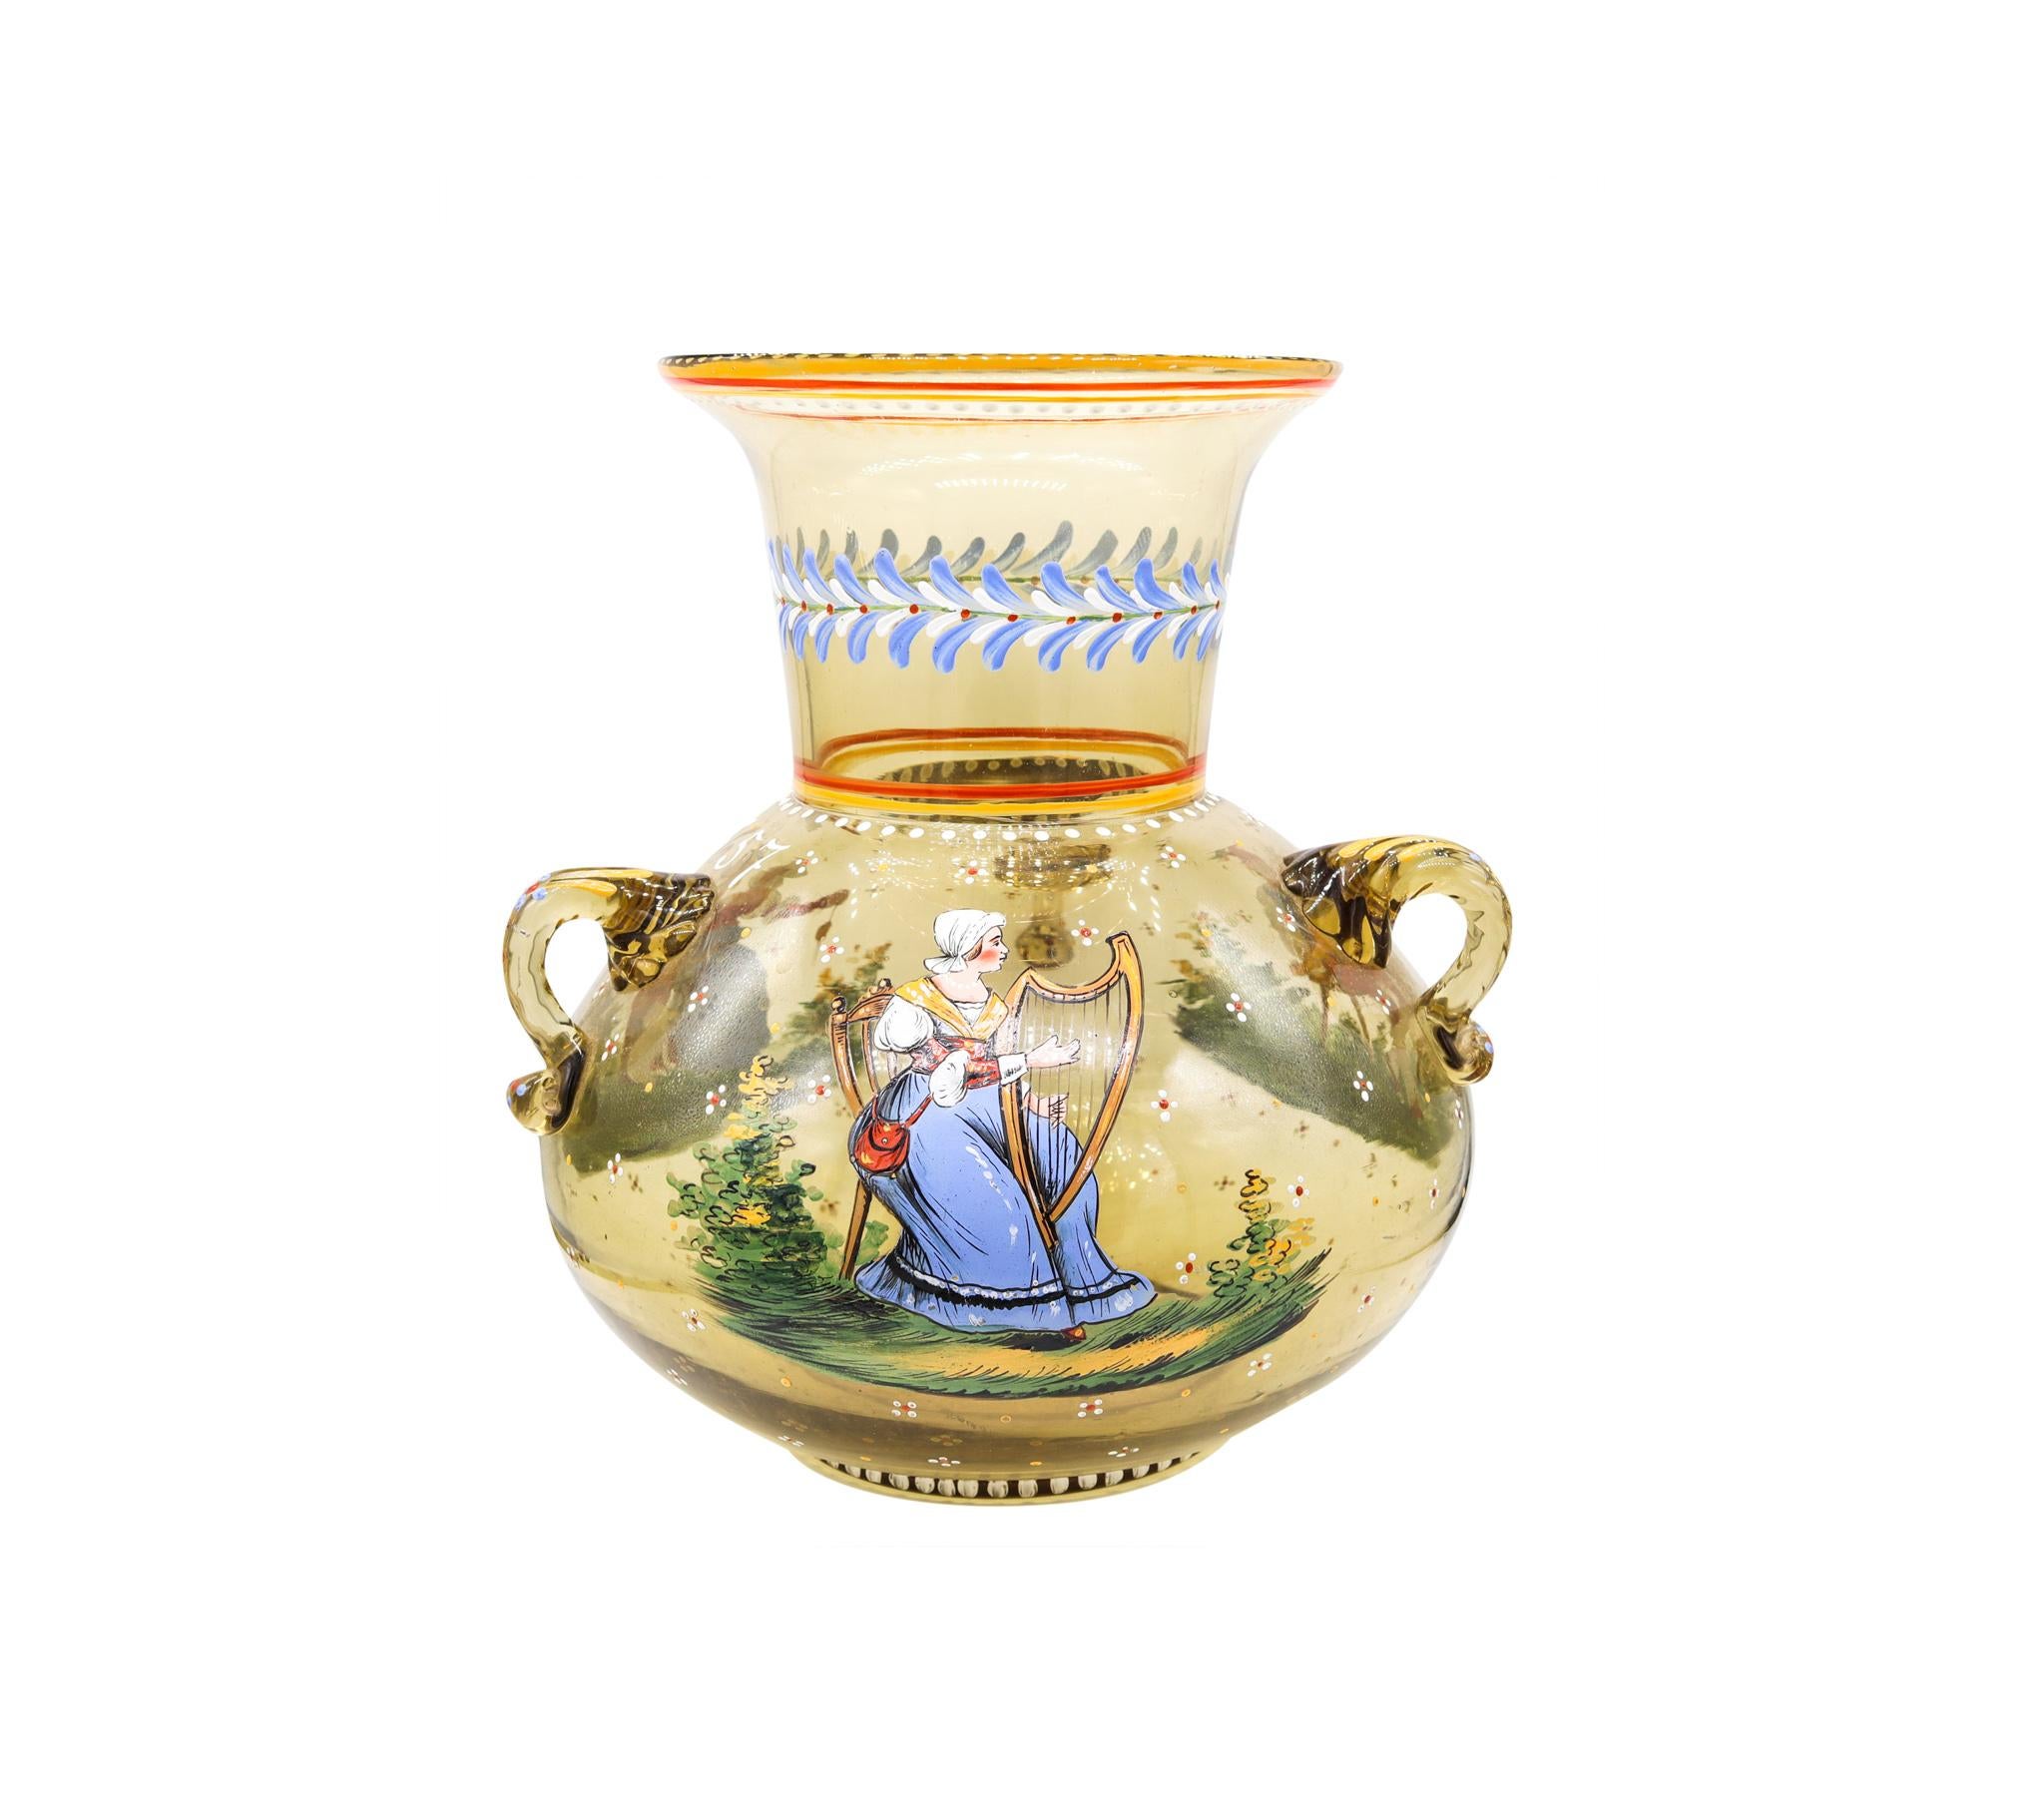 An enameled blown glass vase designed by J. L. Lobmeyr.

Very unique large decorative antique piece, created in Vienna Austria by the Lobmeyr Company during the early Art Nouveau period, circa 1890-1900. This Amphora vase was carefully blown in